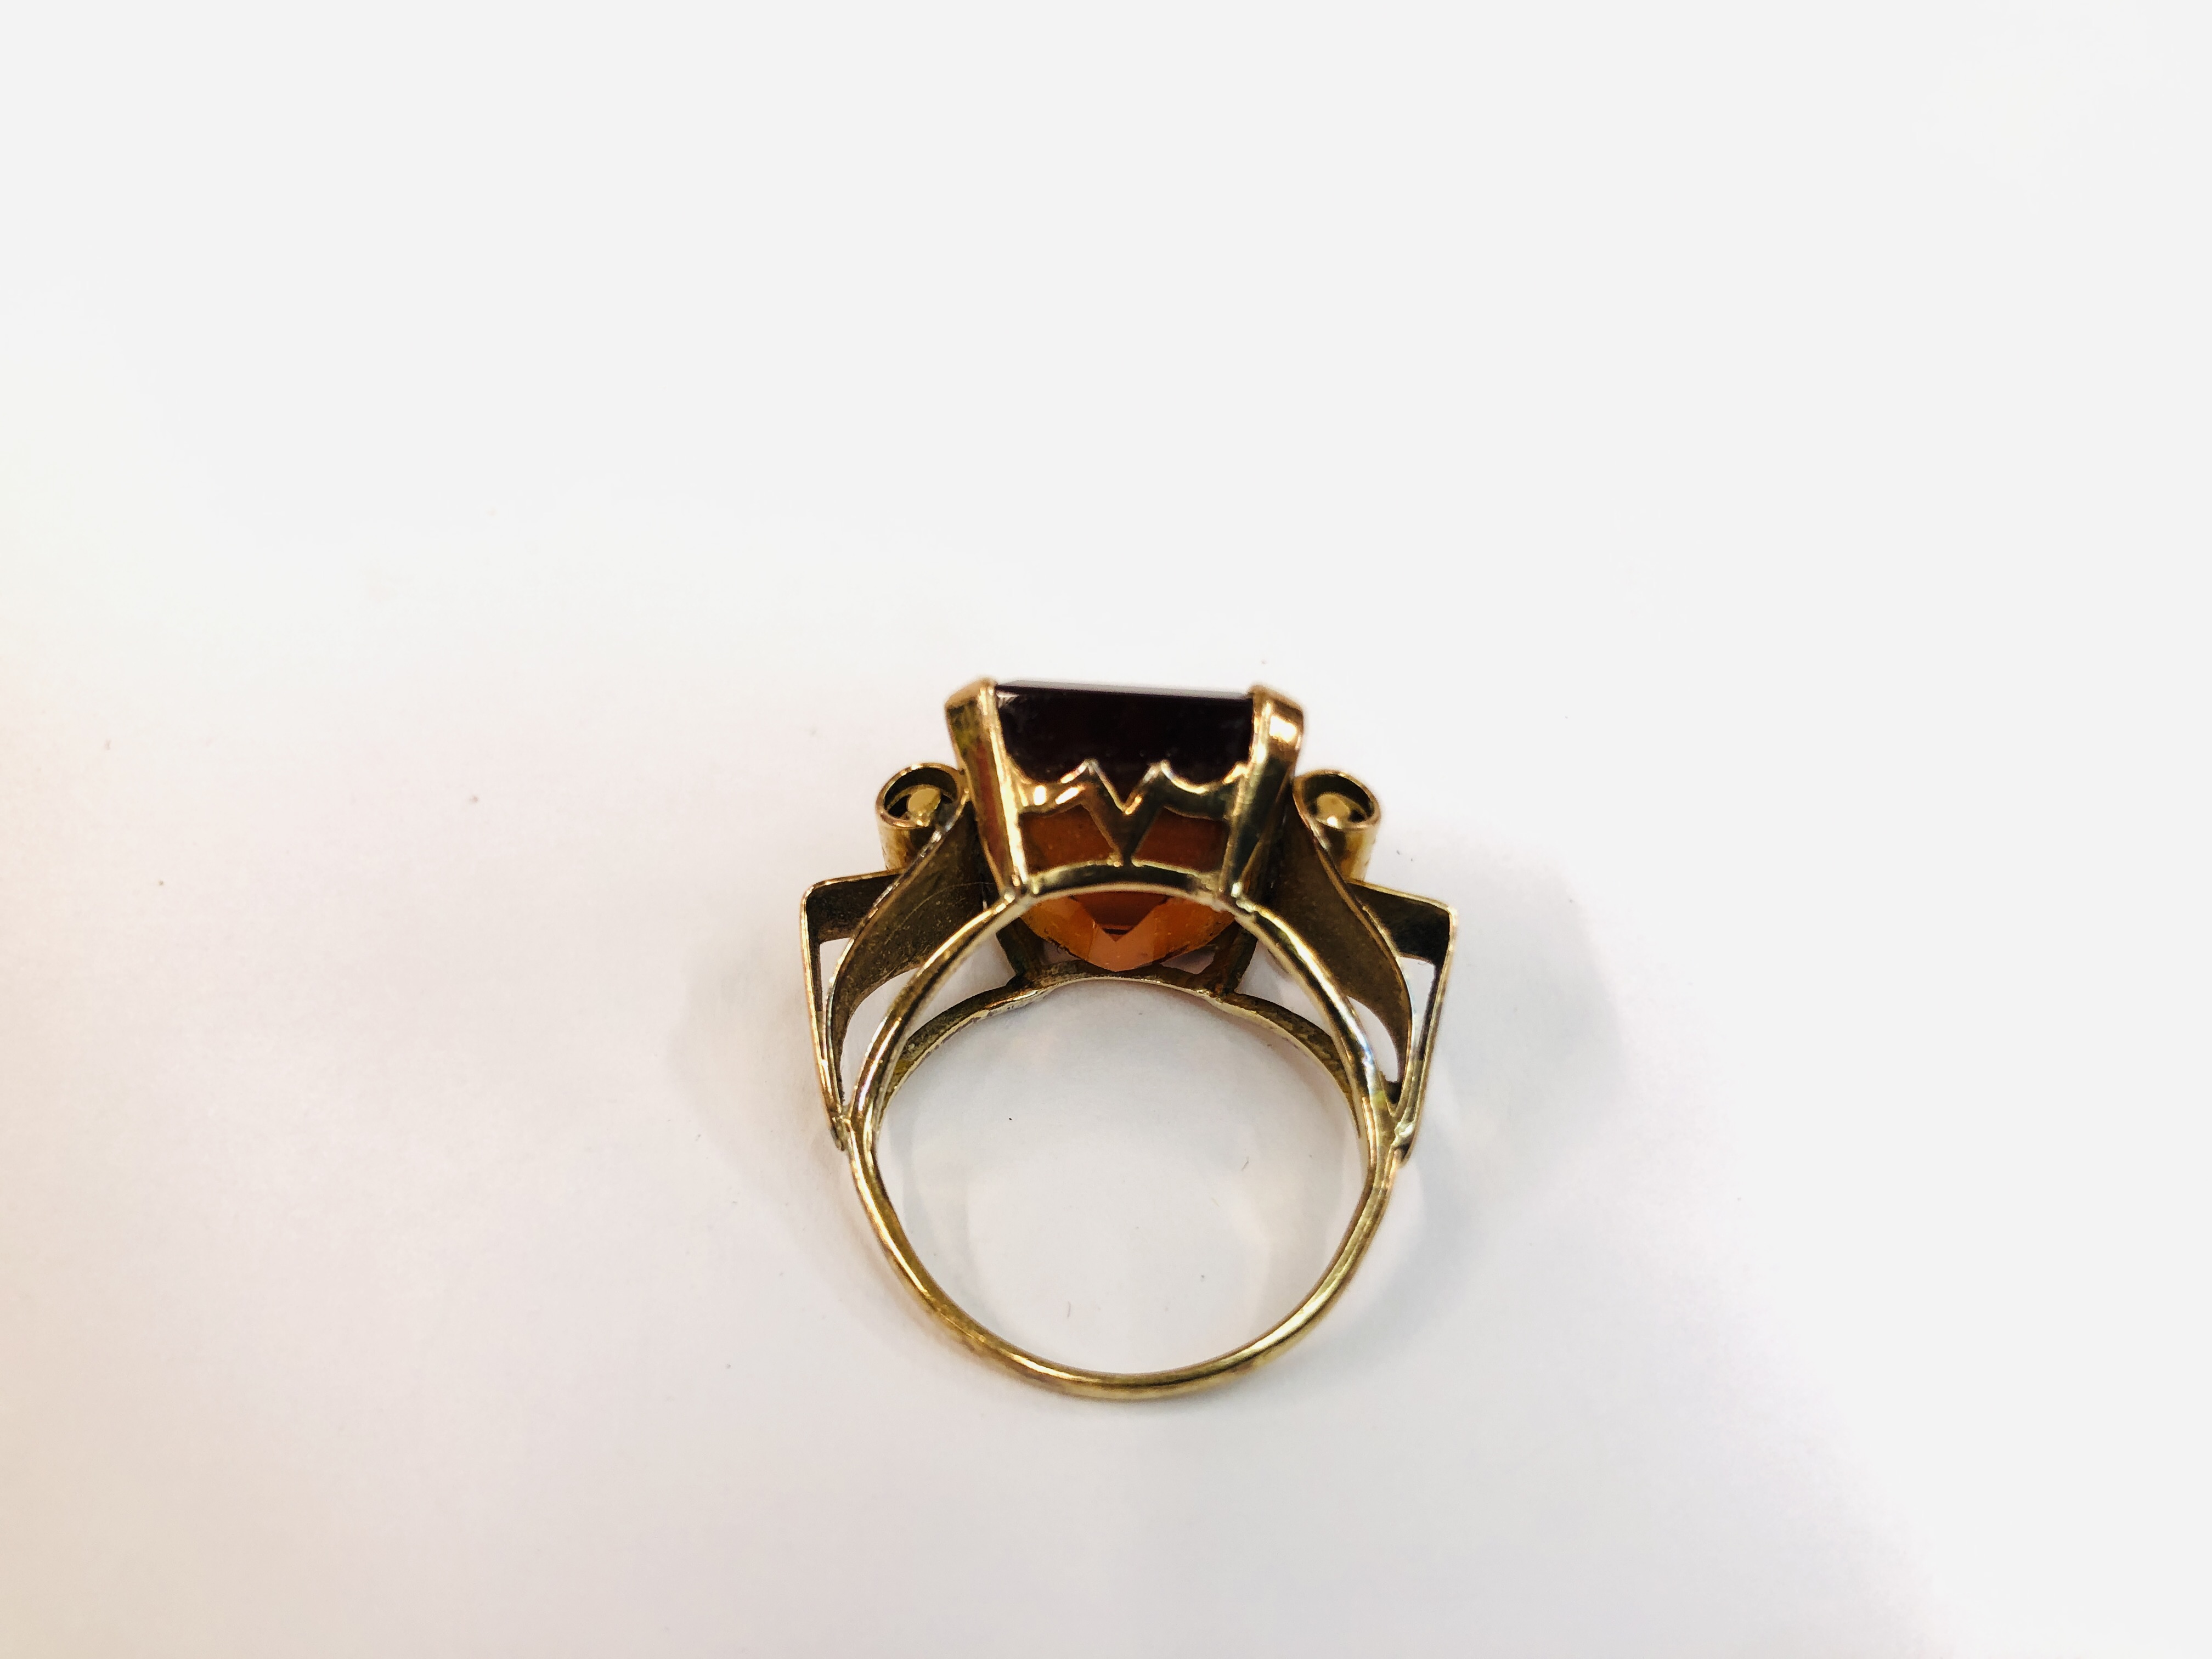 AN UNMARKED YELLOW METAL RING SET WITH AN EMERALD CUT AMBER COLOURED STONE H 1.4CM X W 1.4CM. - Image 5 of 8